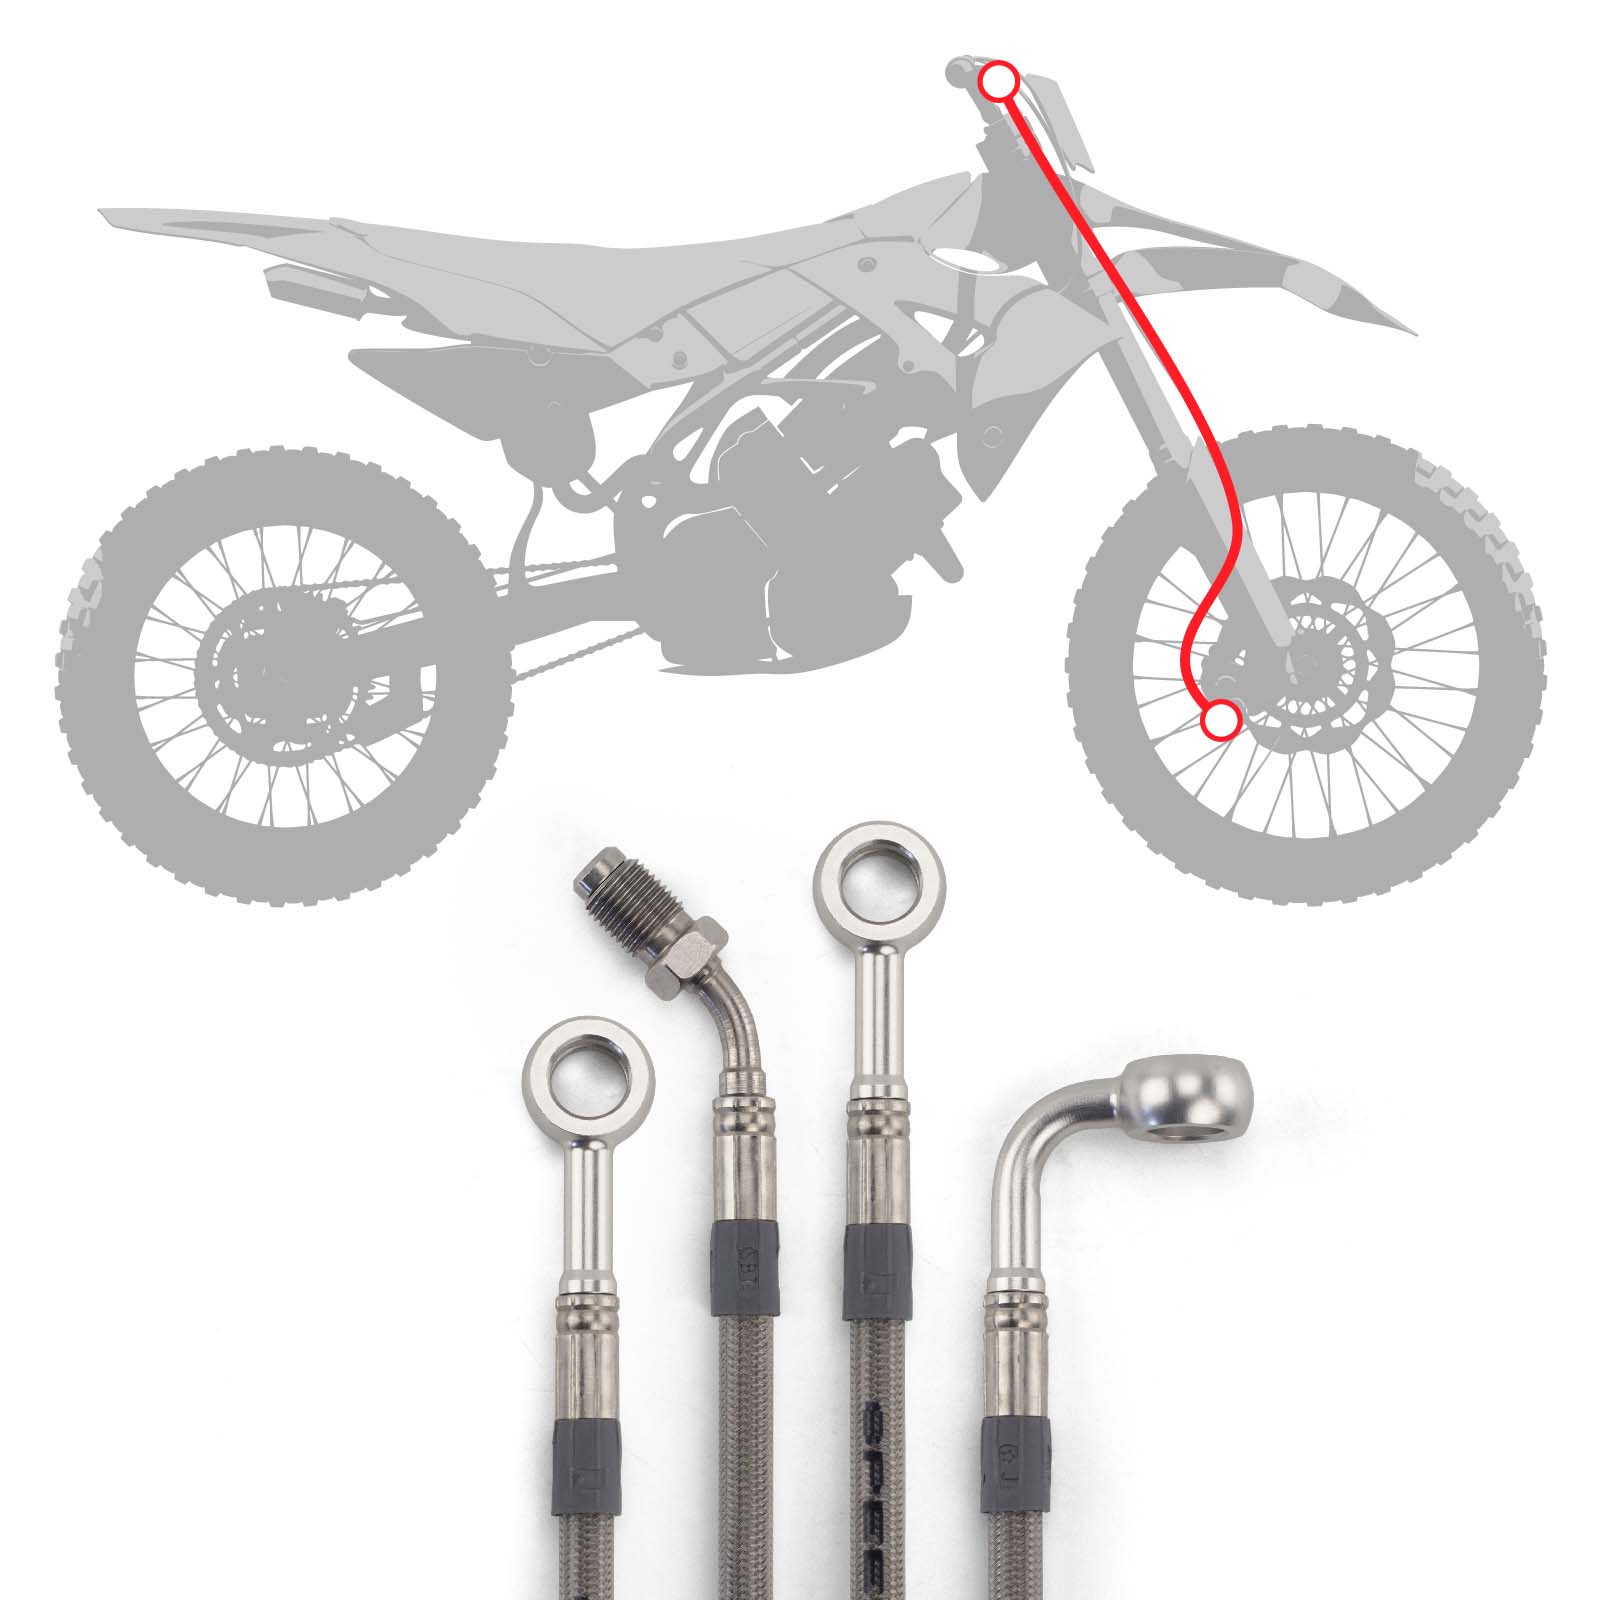 Raximo steel braided brake hose kit front installed like... for Model:  Suzuki DR 650 R SP44A 1991-1996